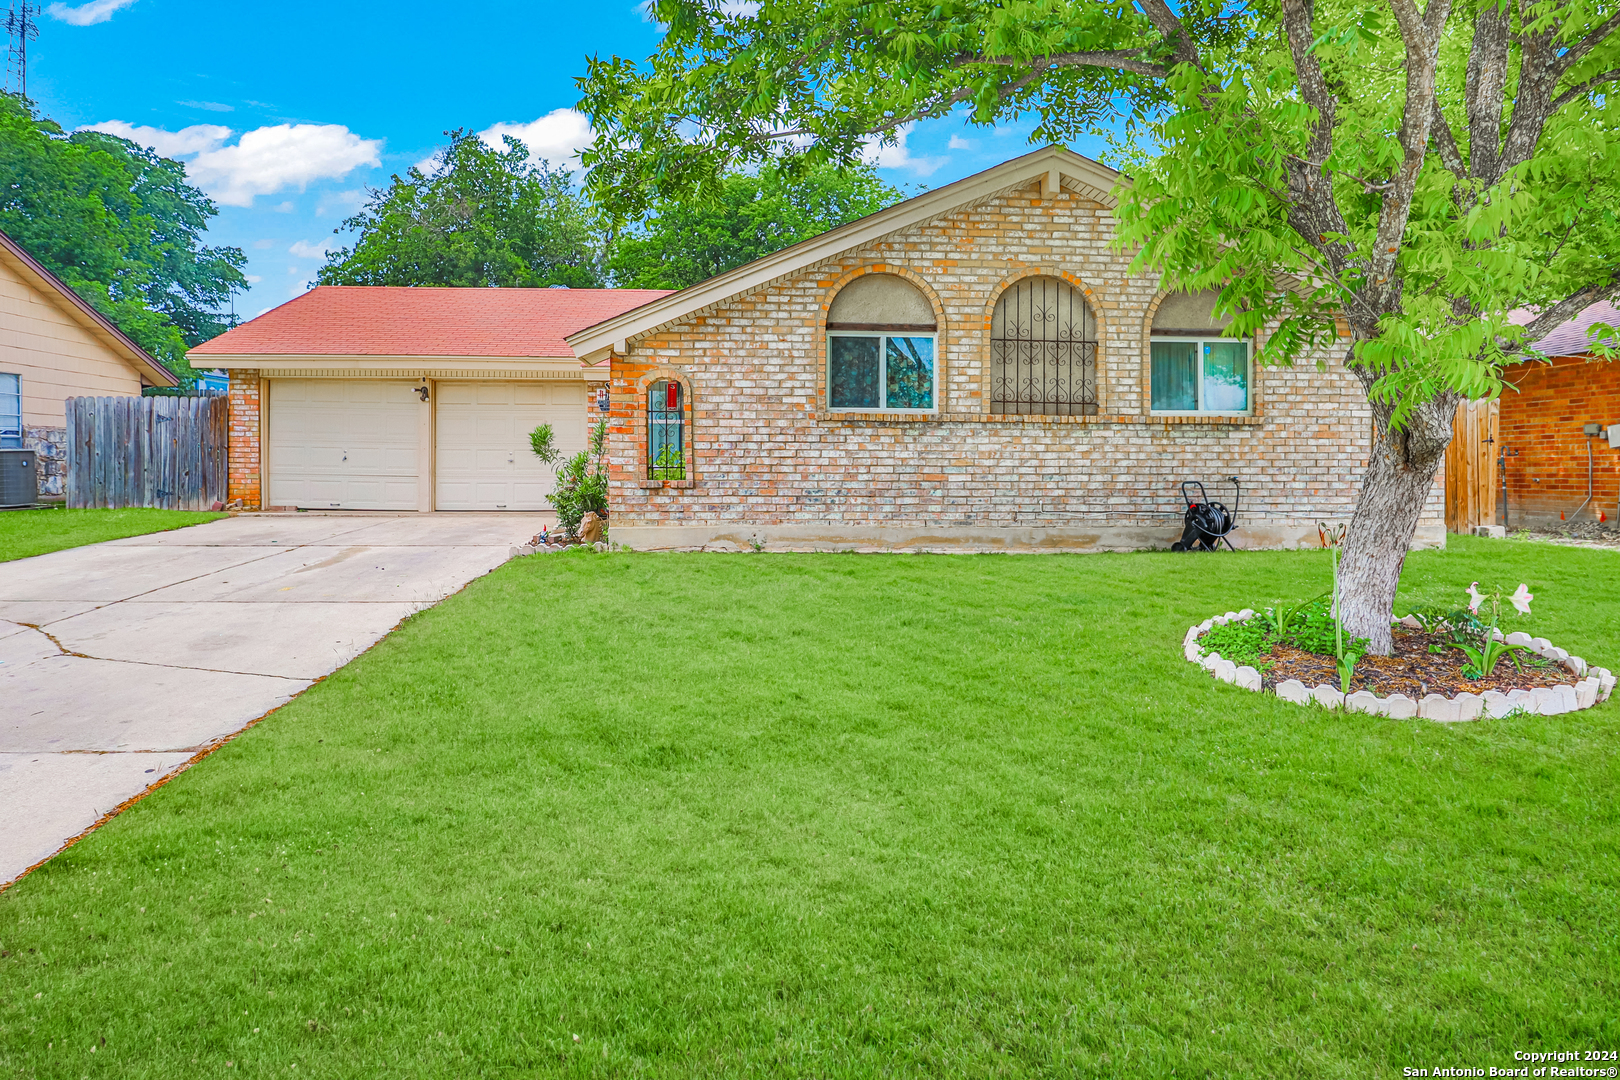 Photo of 7501 Leafy Hllw in Live Oak, TX